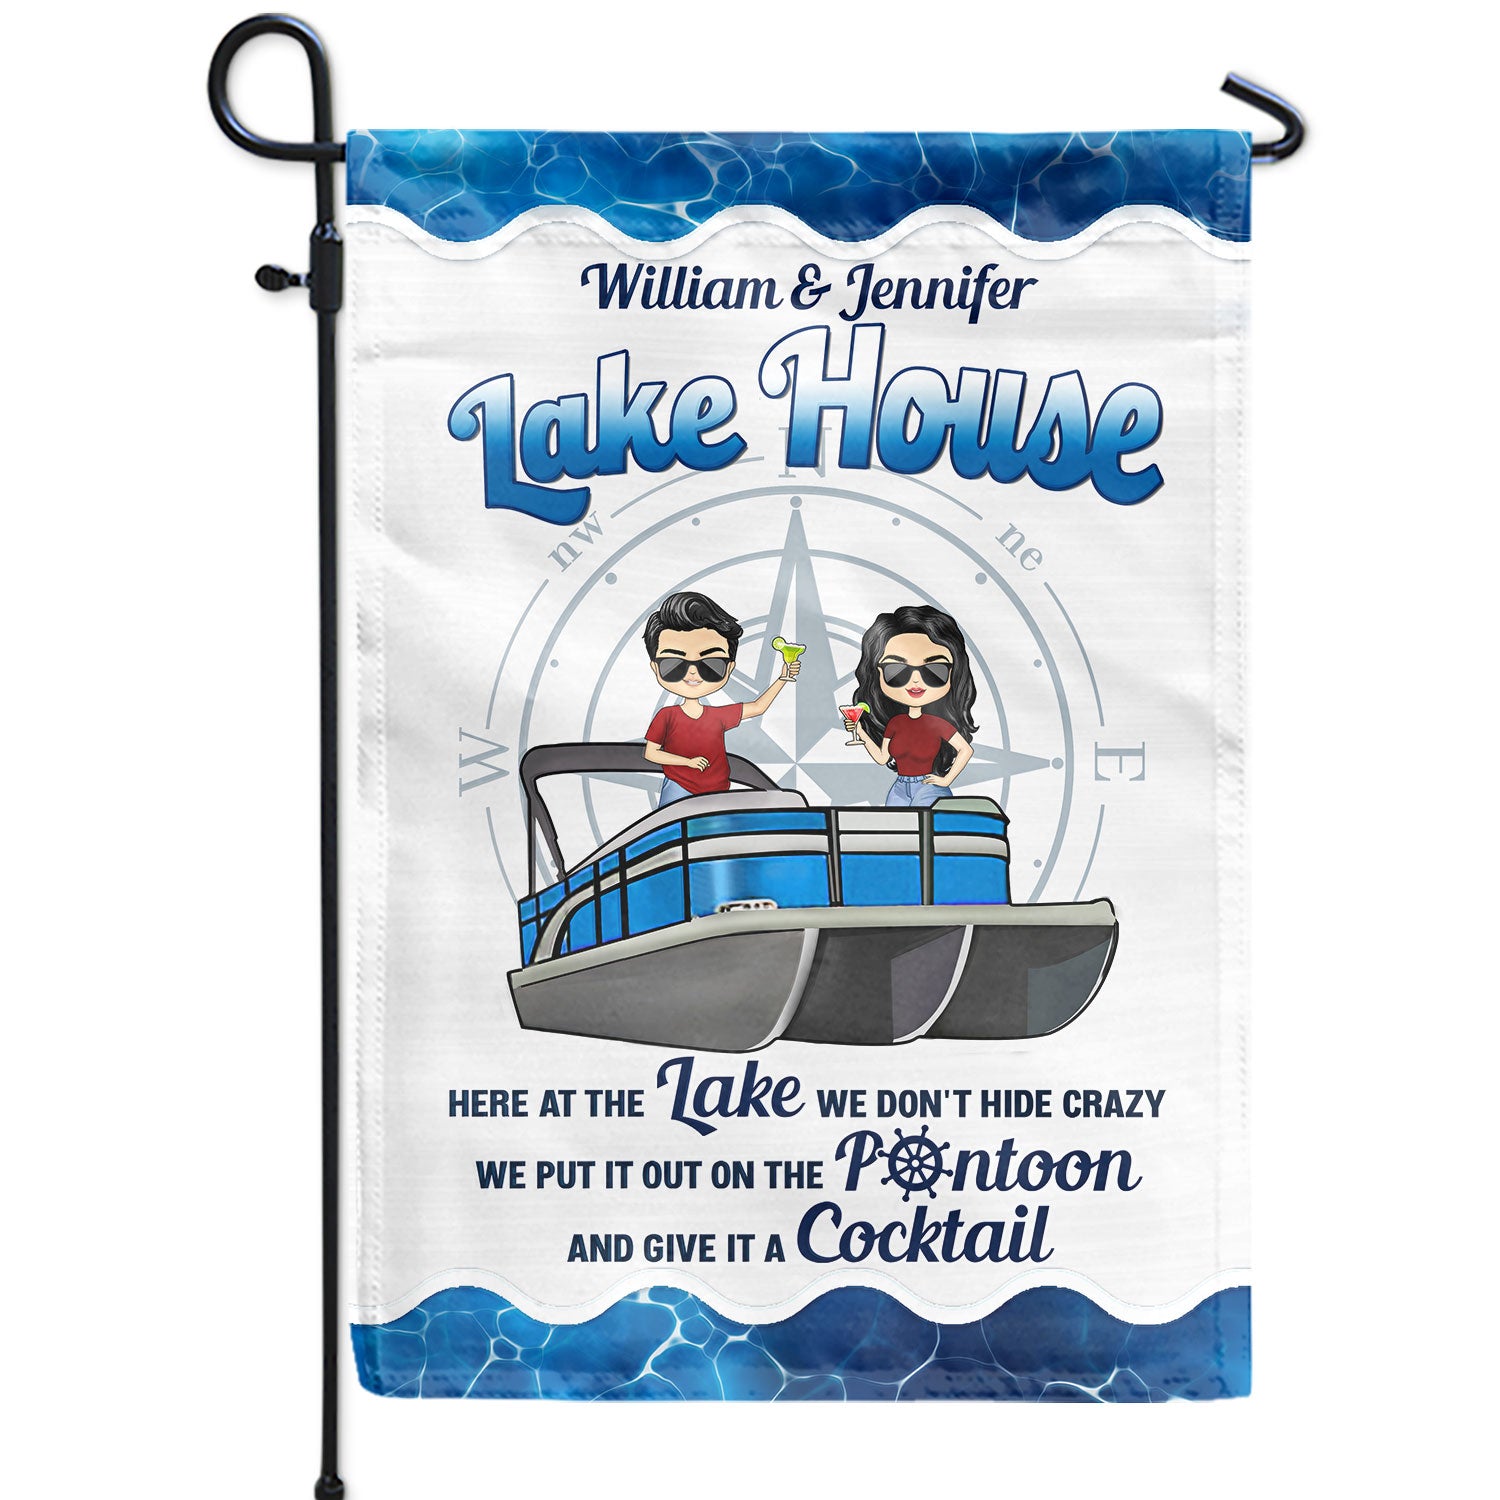 Pontoon Here At The Lake We Don't Hide Crazy - Home Decor, Backyard Decor, Lake House Decor, Gift For Pontooning Lovers, Couples, Wife, Husband - Personalized Custom Flag